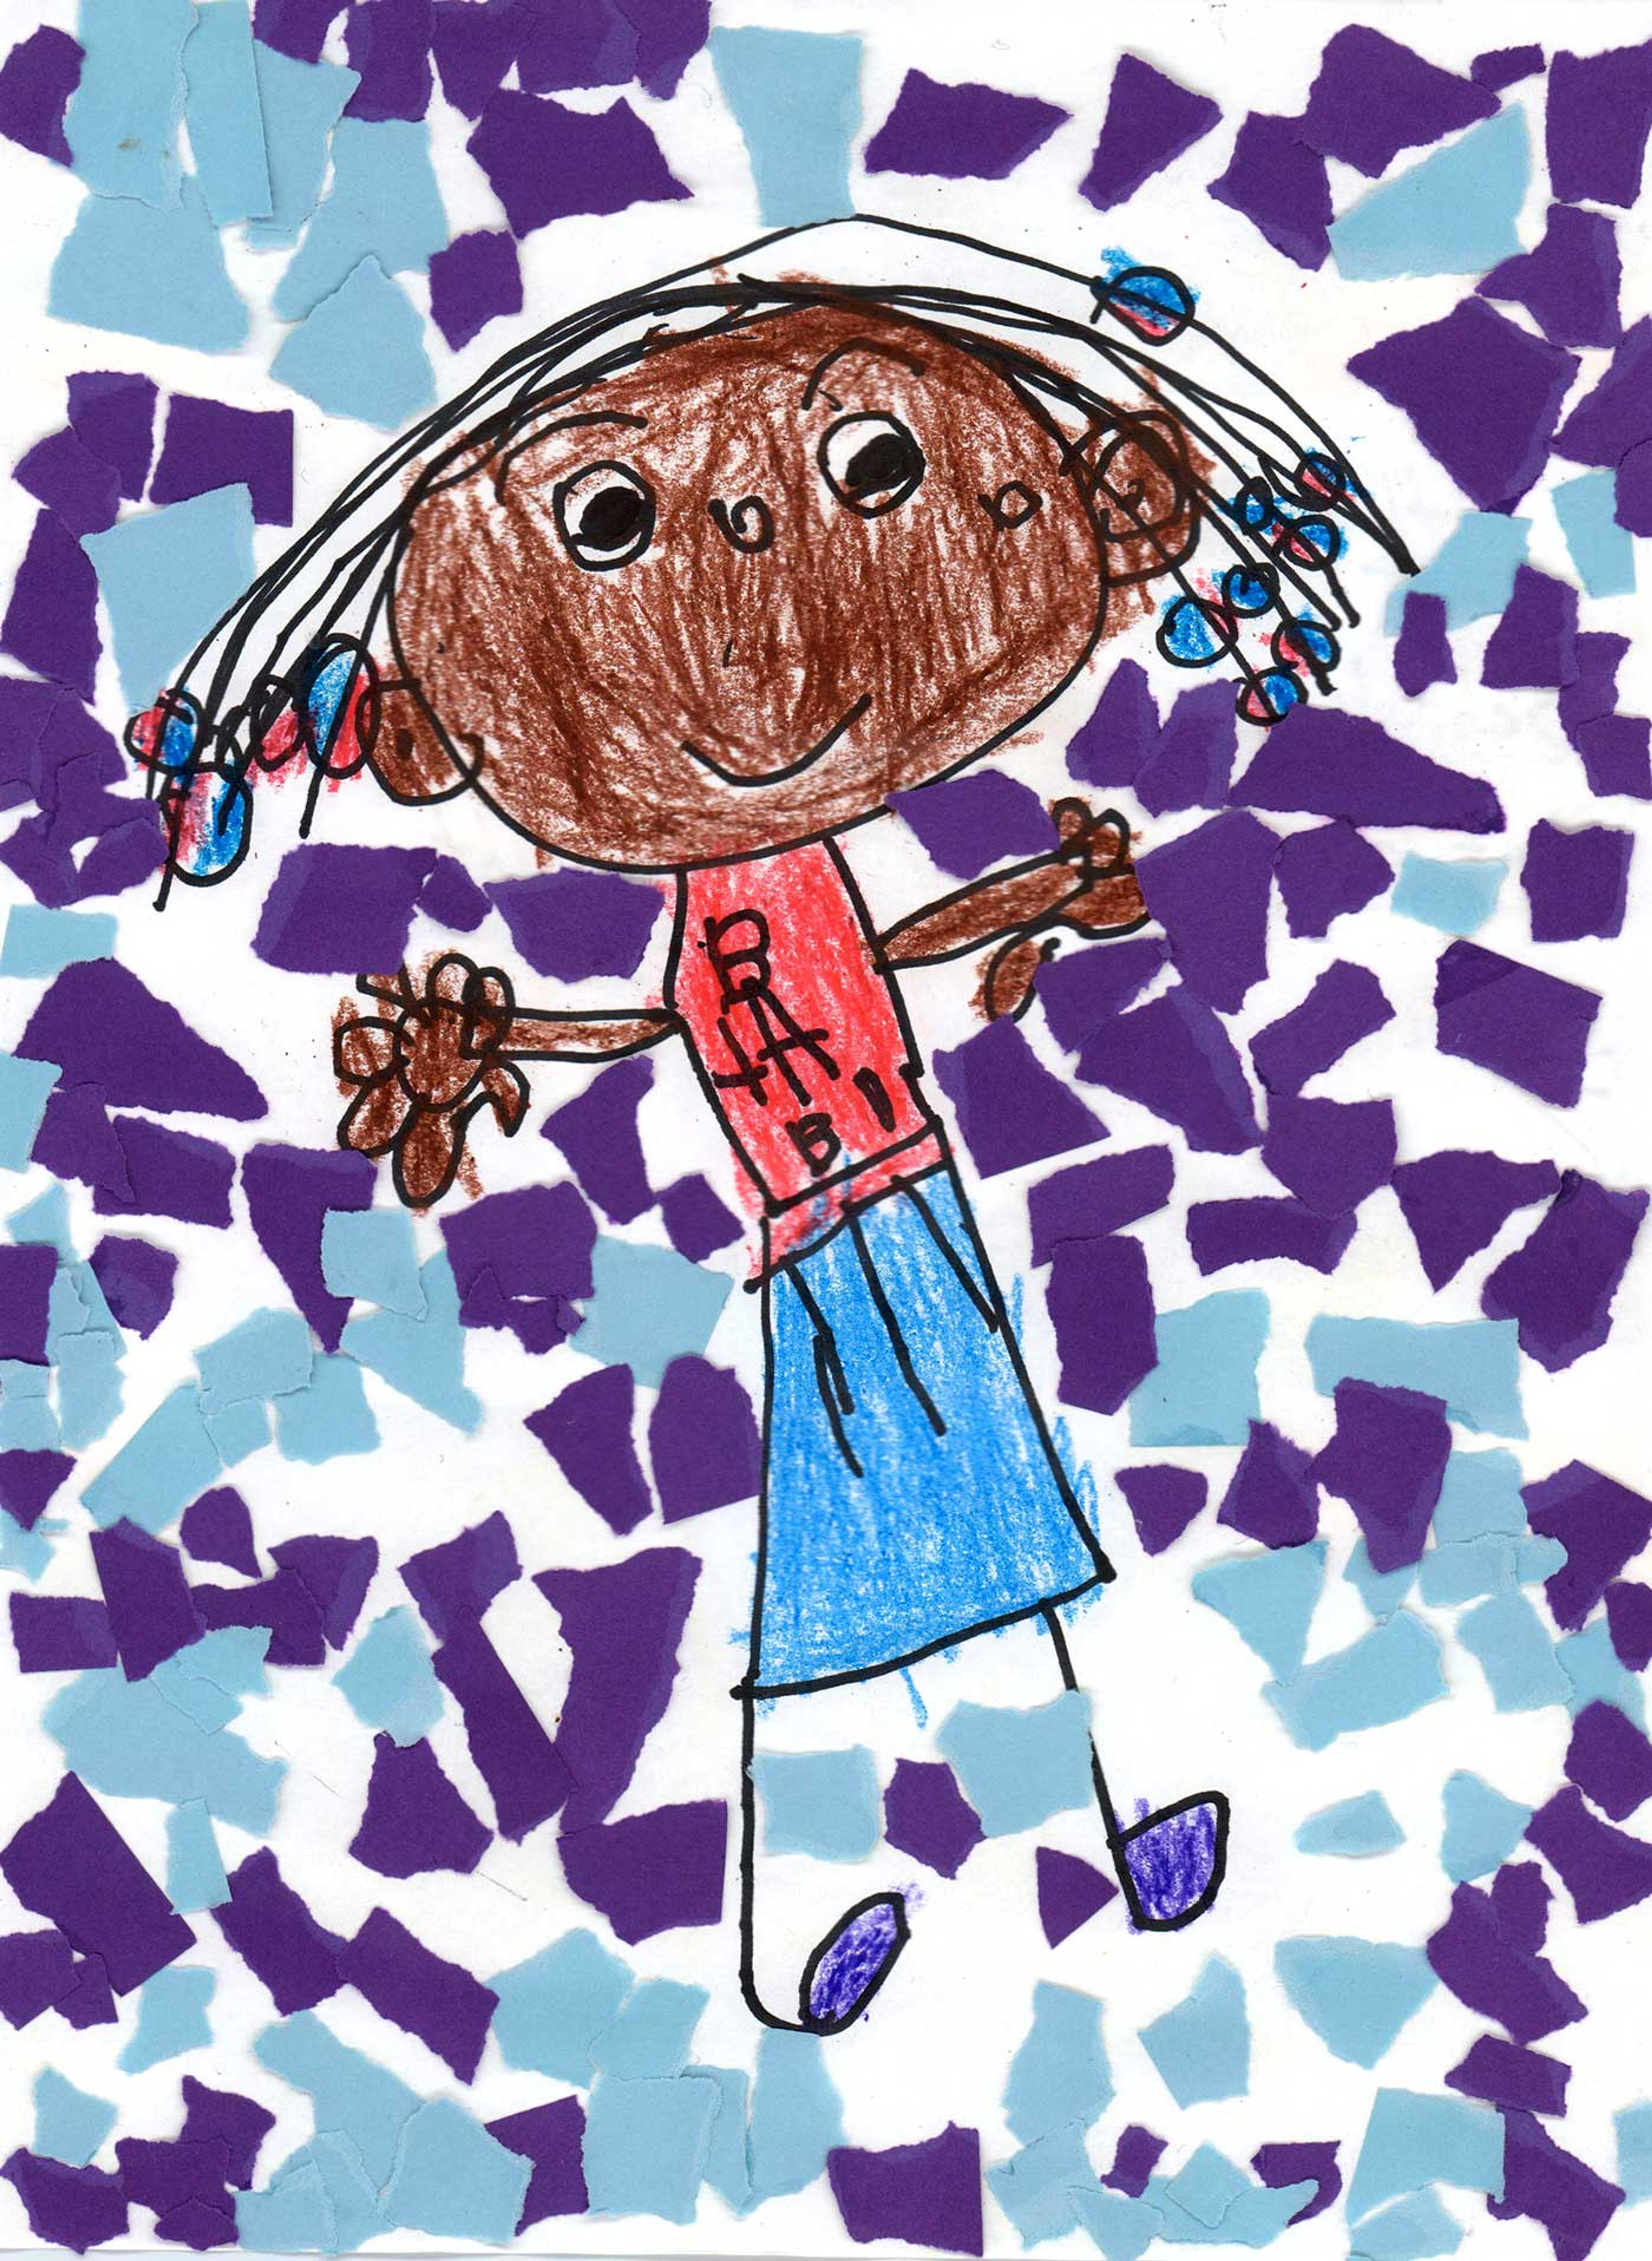 Drawing of a young girl in a blue skirt and red shirt with a background of torn pieces of blue and purple paper.